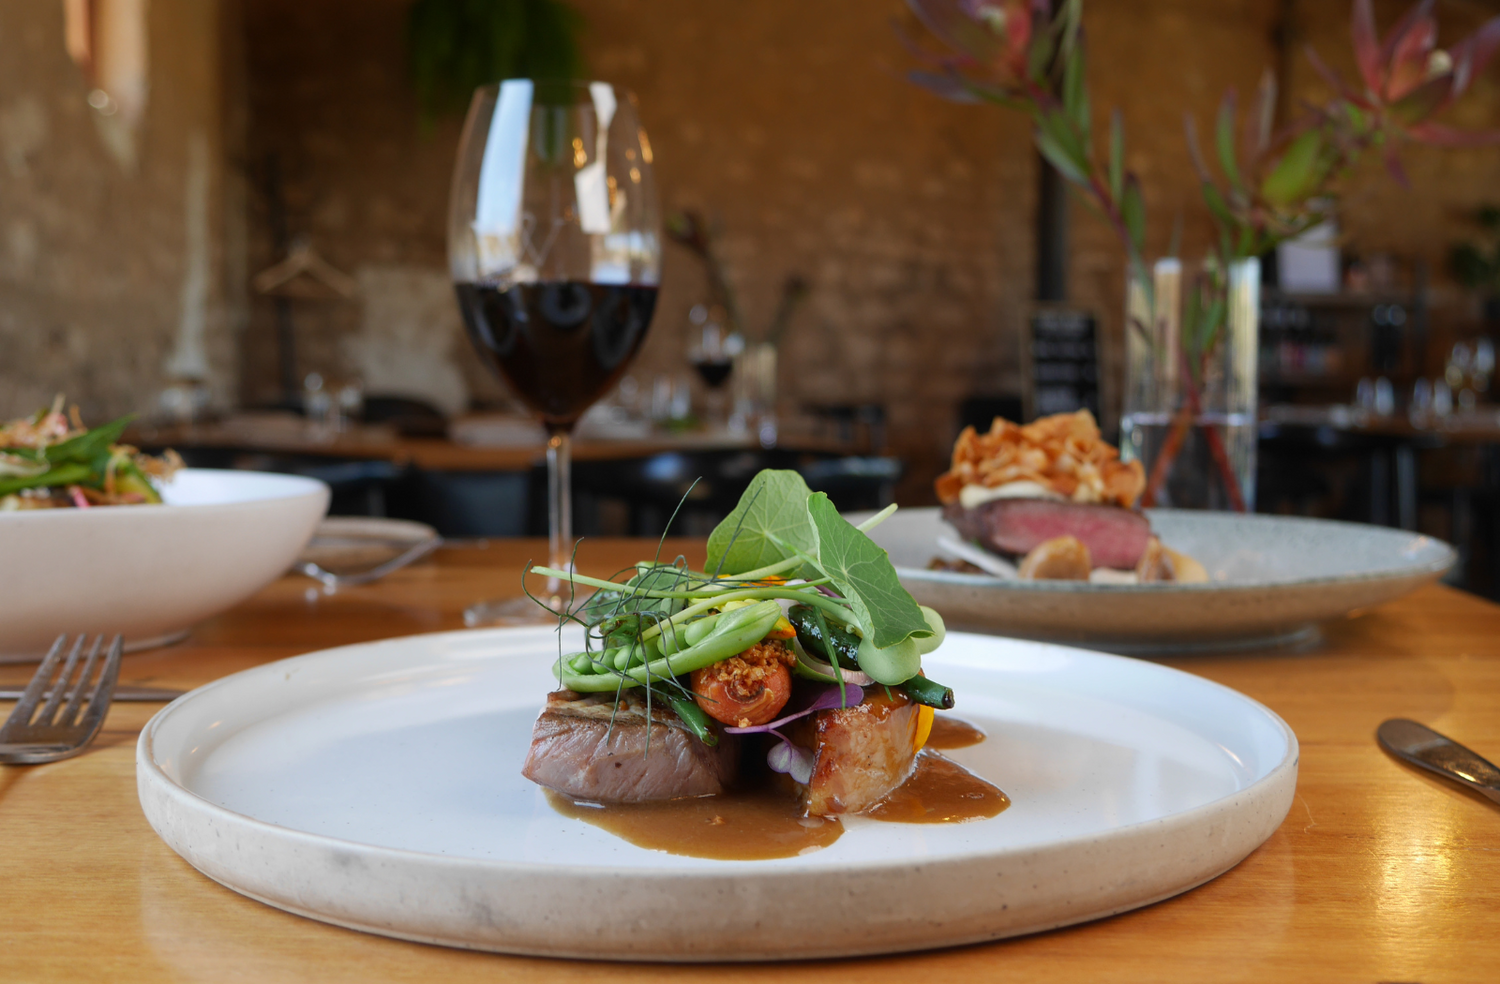 A glass of Varney Wines Mencia served on a table with a lovely duck dish.